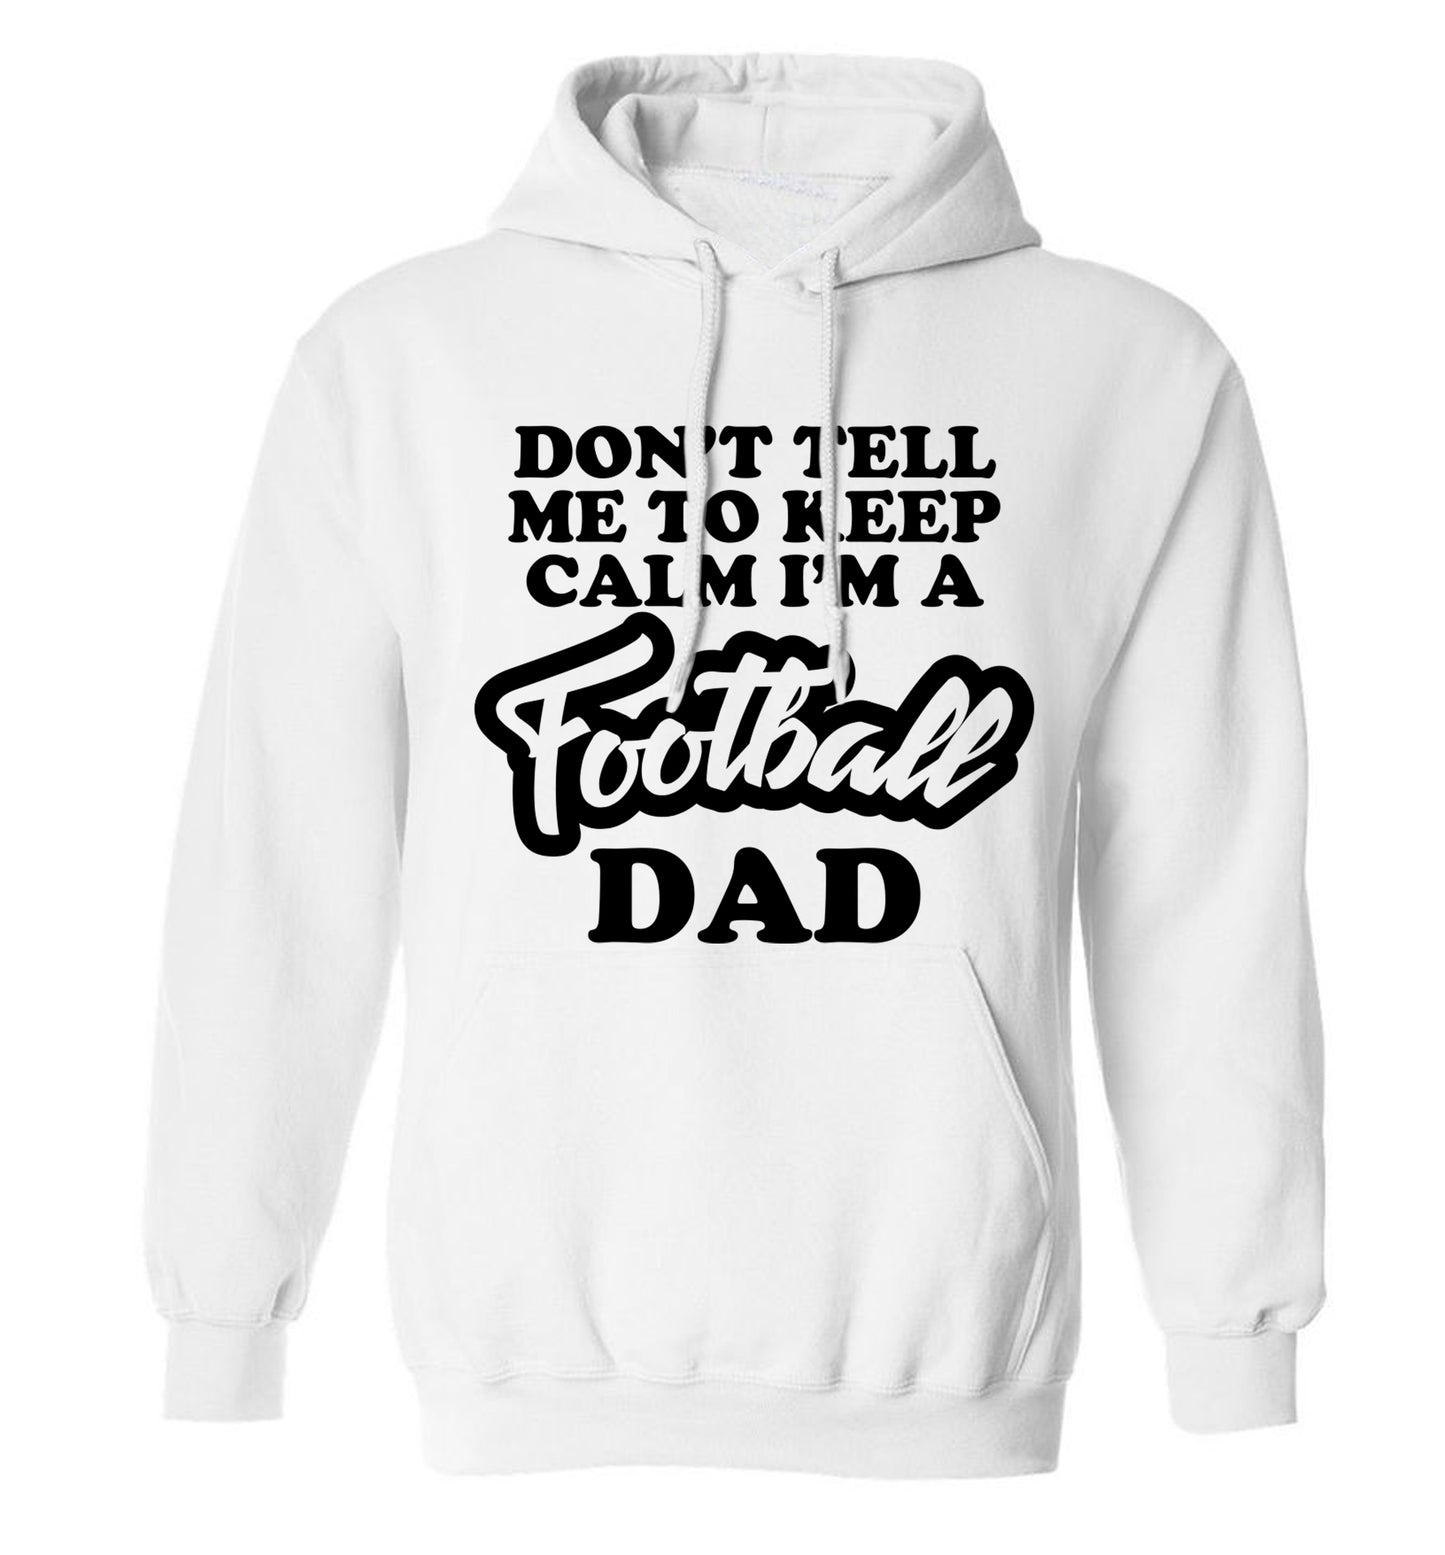 Don't tell me to keep calm I'm a football dad adults unisexwhite hoodie 2XL